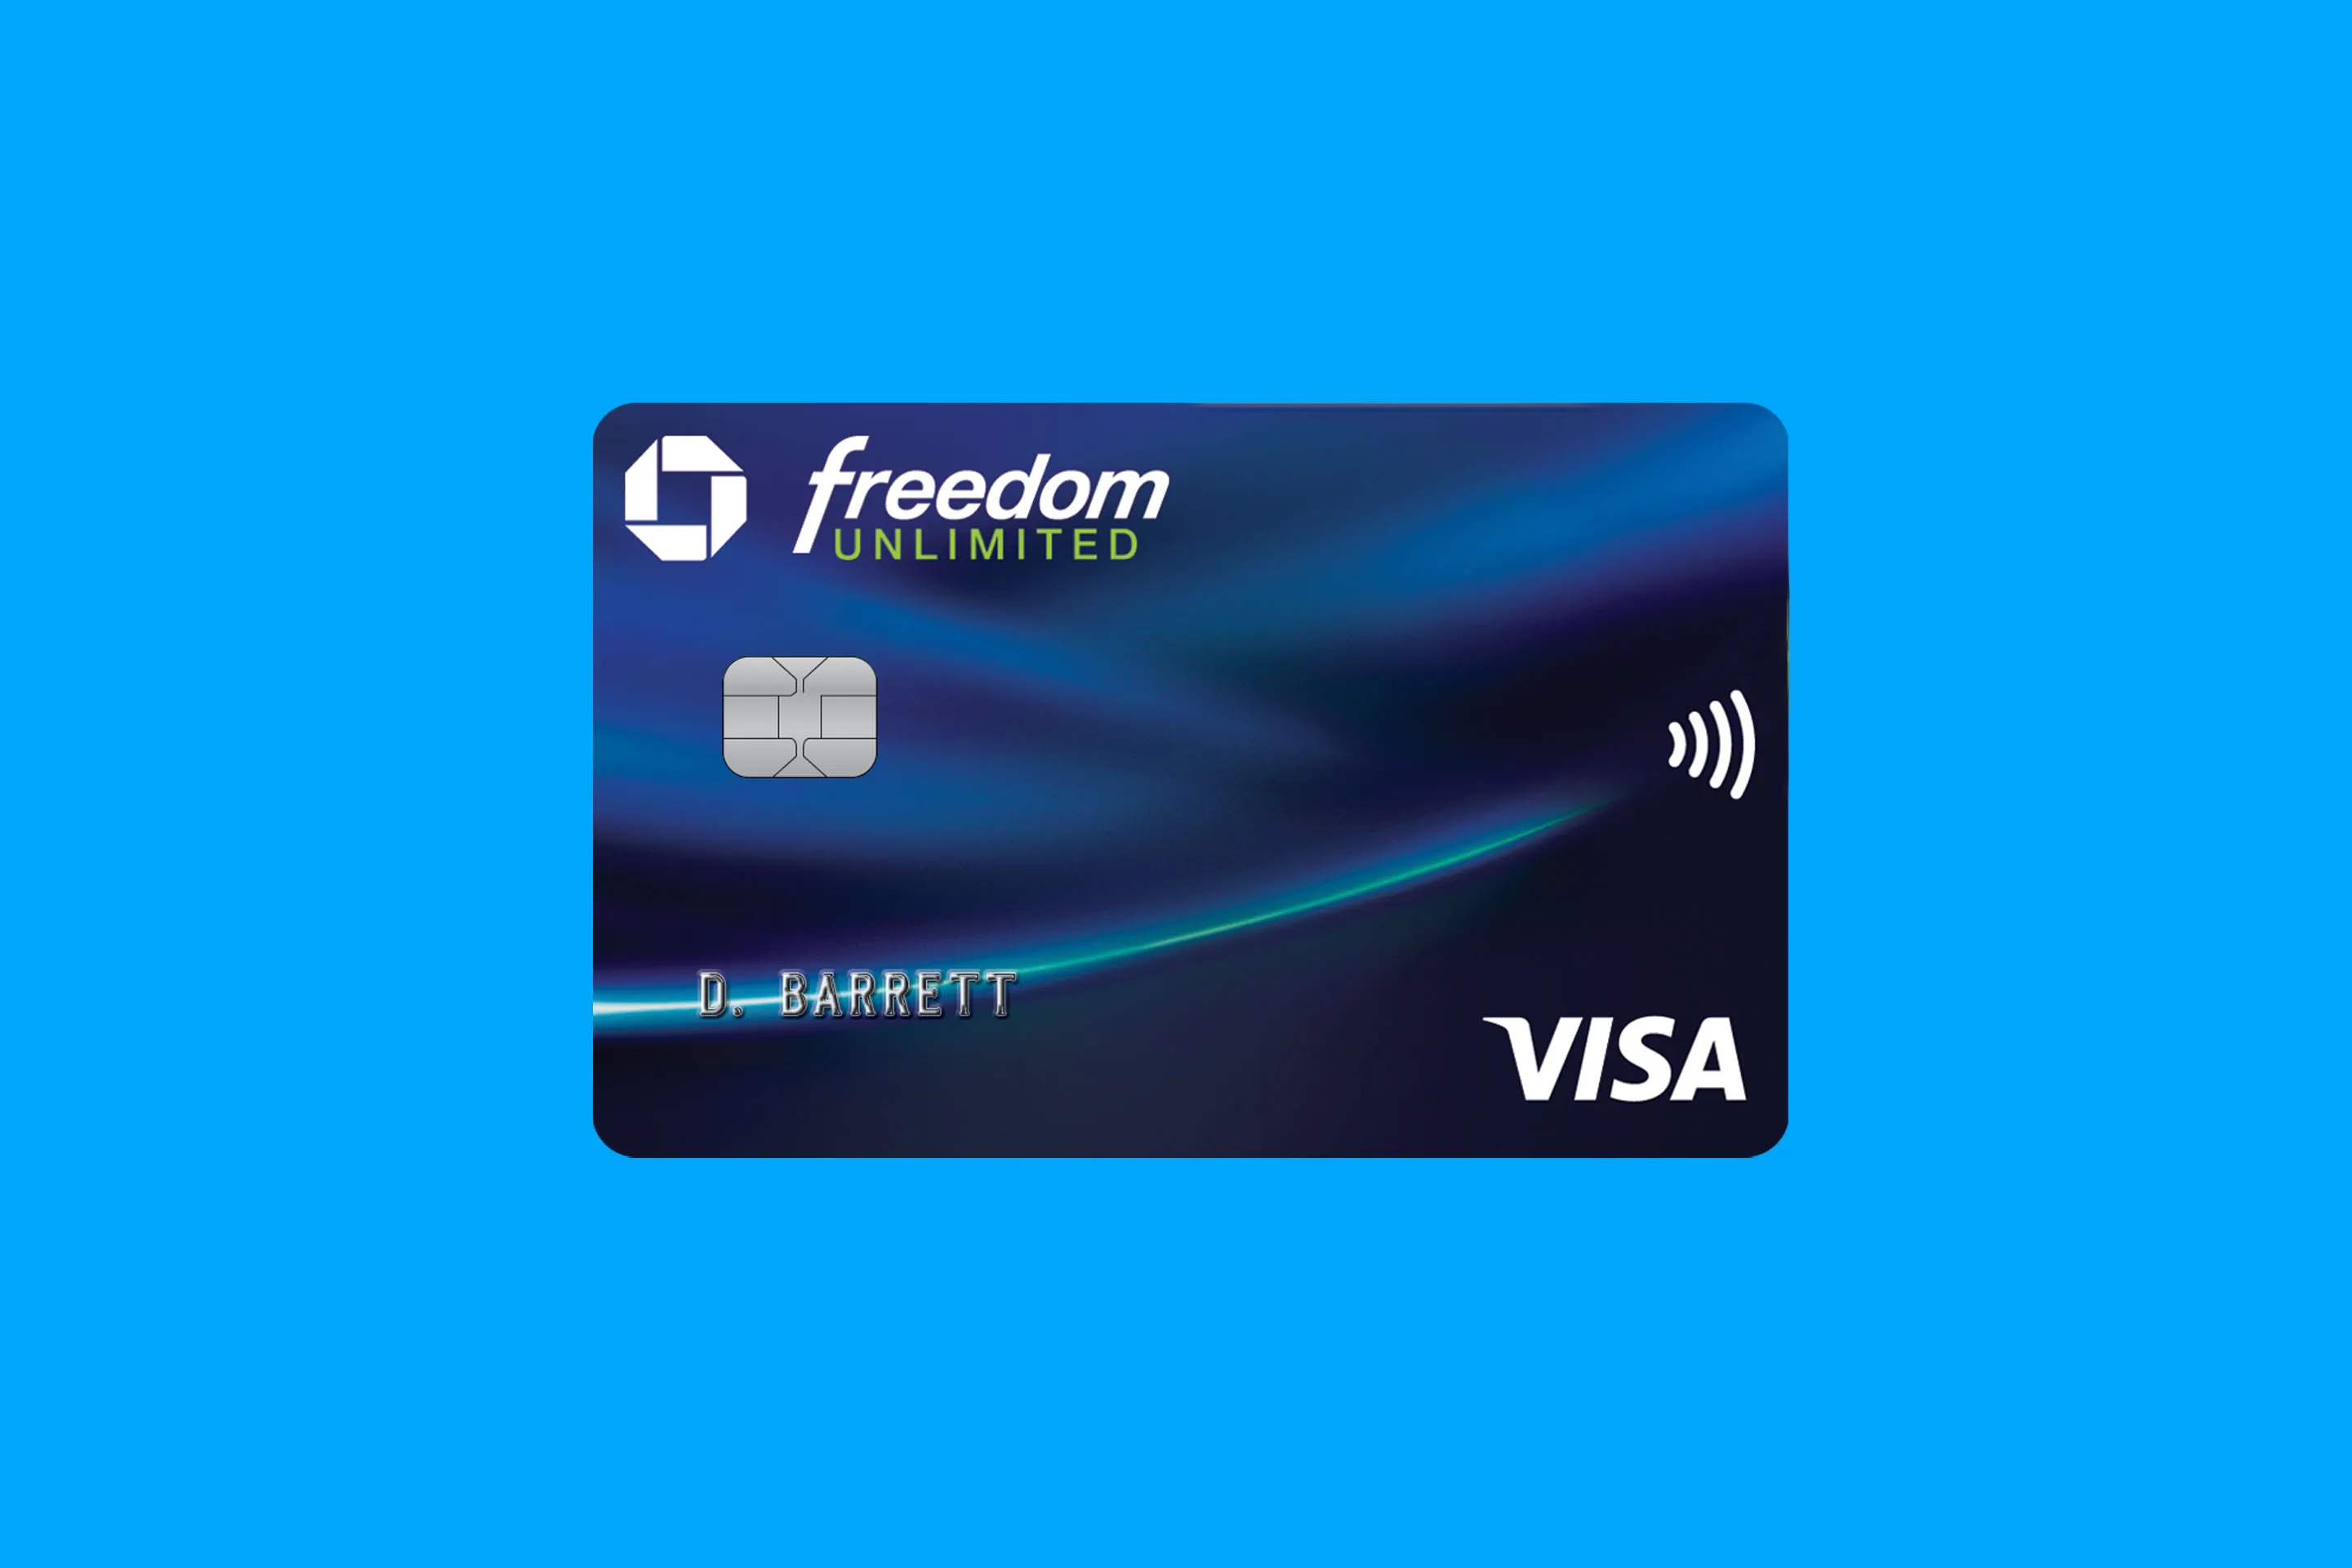 chase freedom card benefits guide